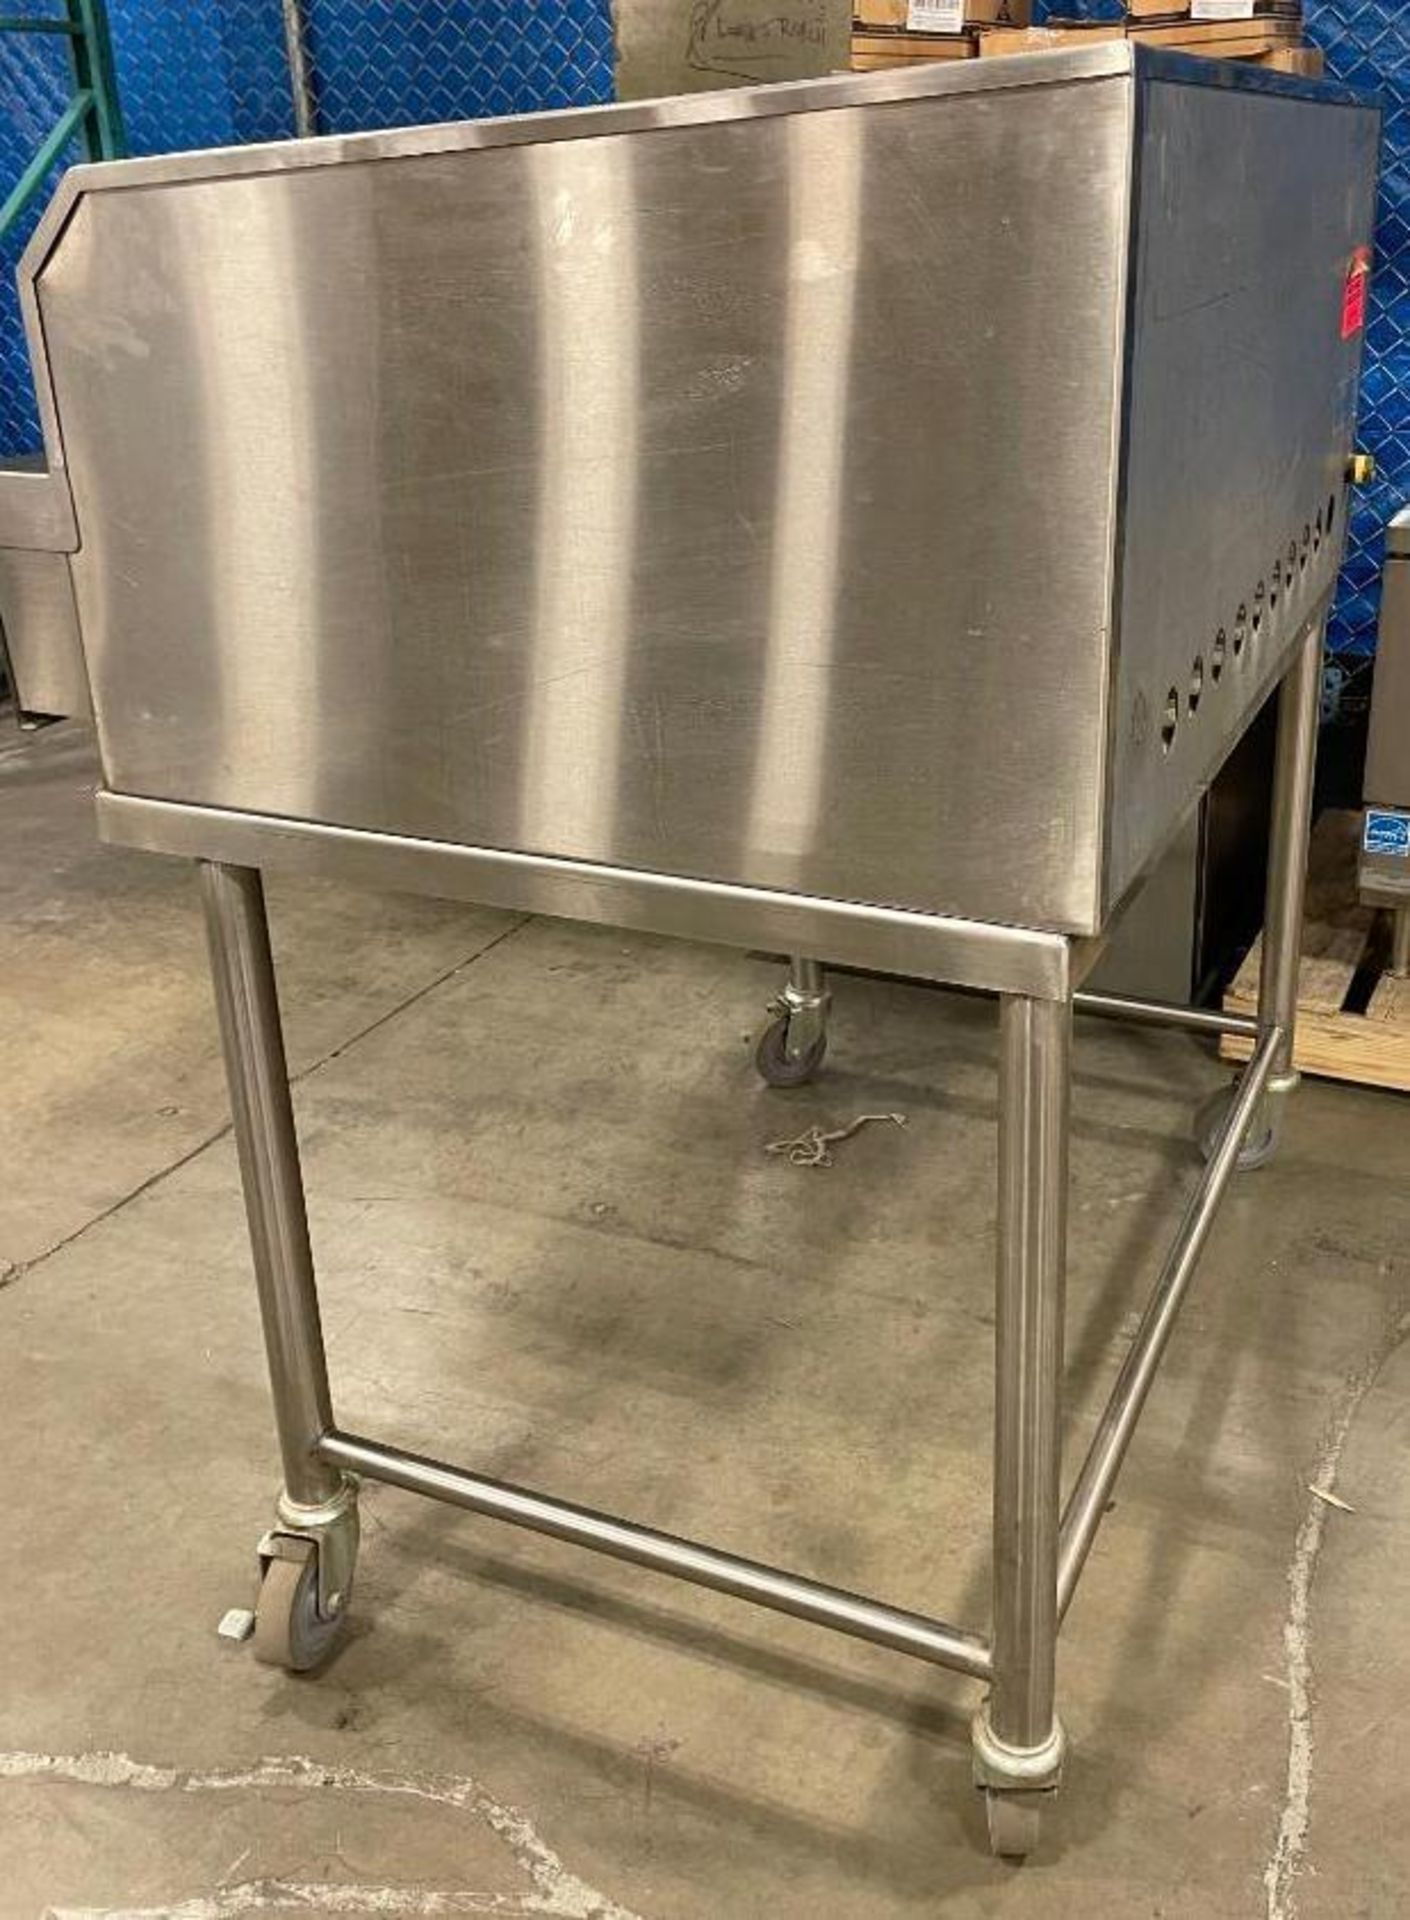 QUEST QGMB36 CHARBROILER WITH STAND - Image 5 of 10